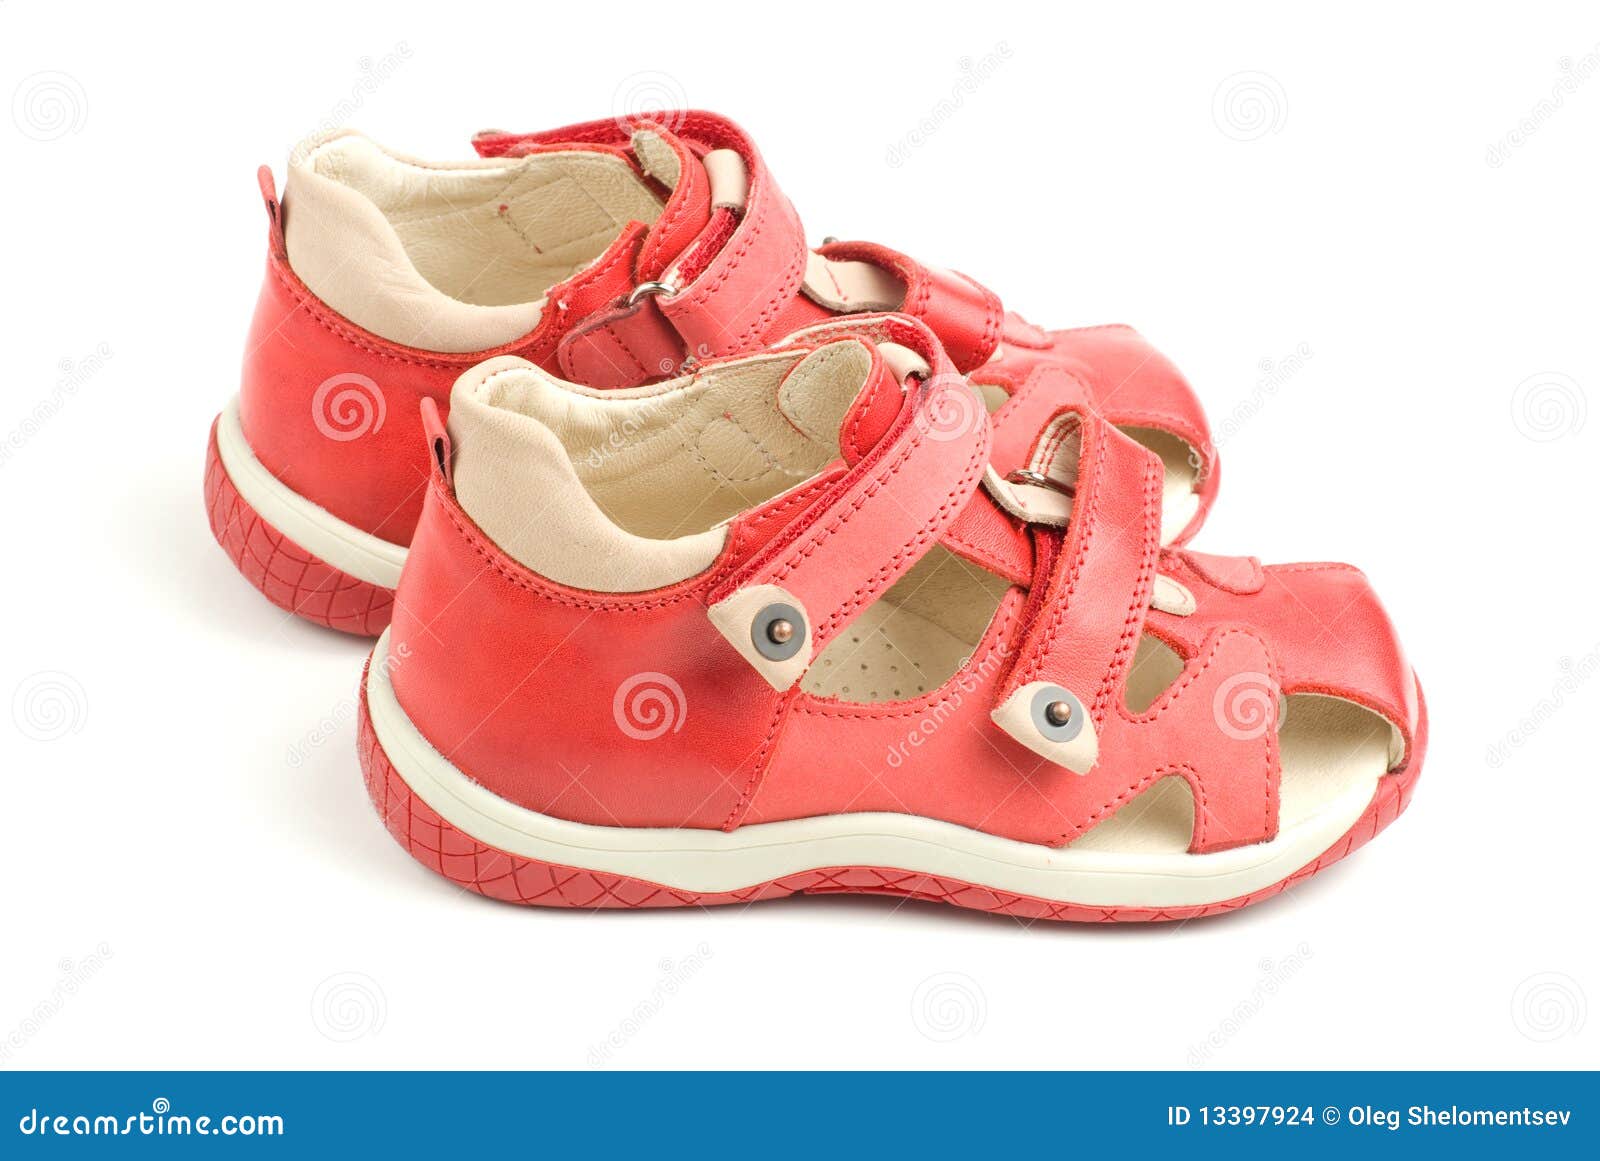 Little Red Kids Shoes. Stock Images - Image: 13397924